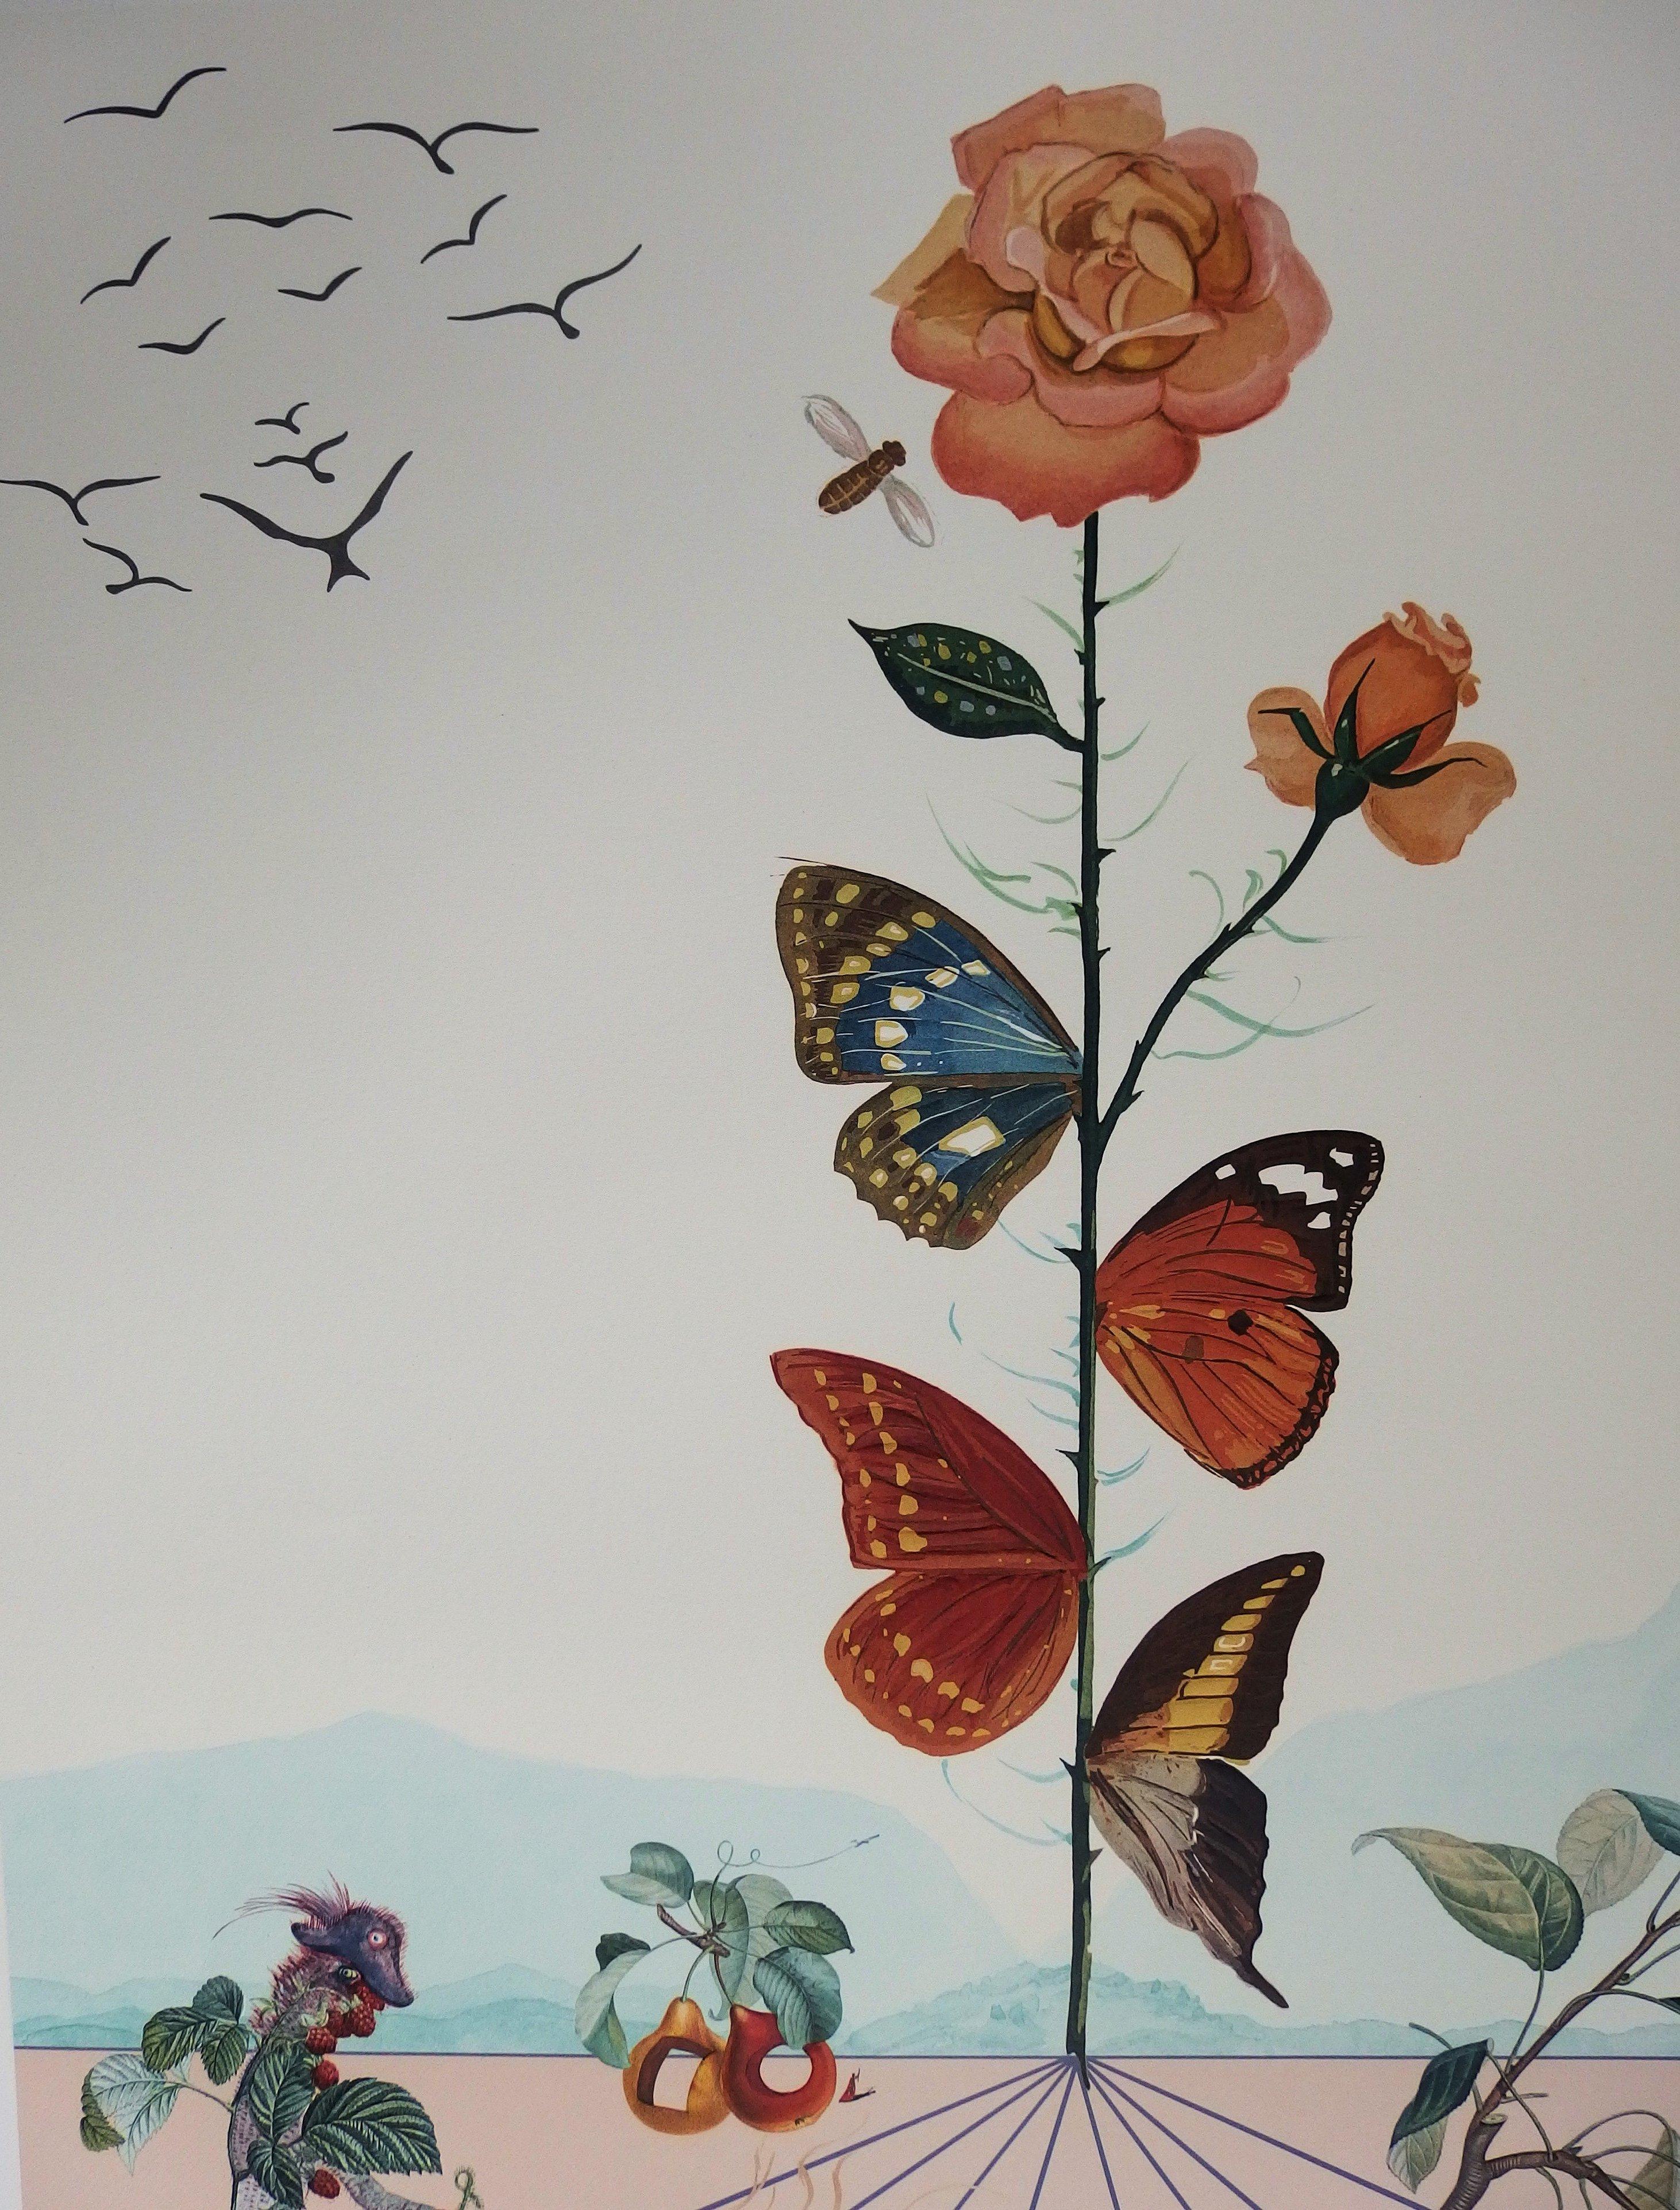 Salvador DALI
Flordali II, 1981

Original lithograph and embossing
Printed signature in the plate
Numbered / 5000 
On Arches vellum 41 x 29 in.; (103 x 73 cm)

REFERENCES : 
- Catalog raisonne Field page 233 
- Catalog raisonne Michler & Lopsinger